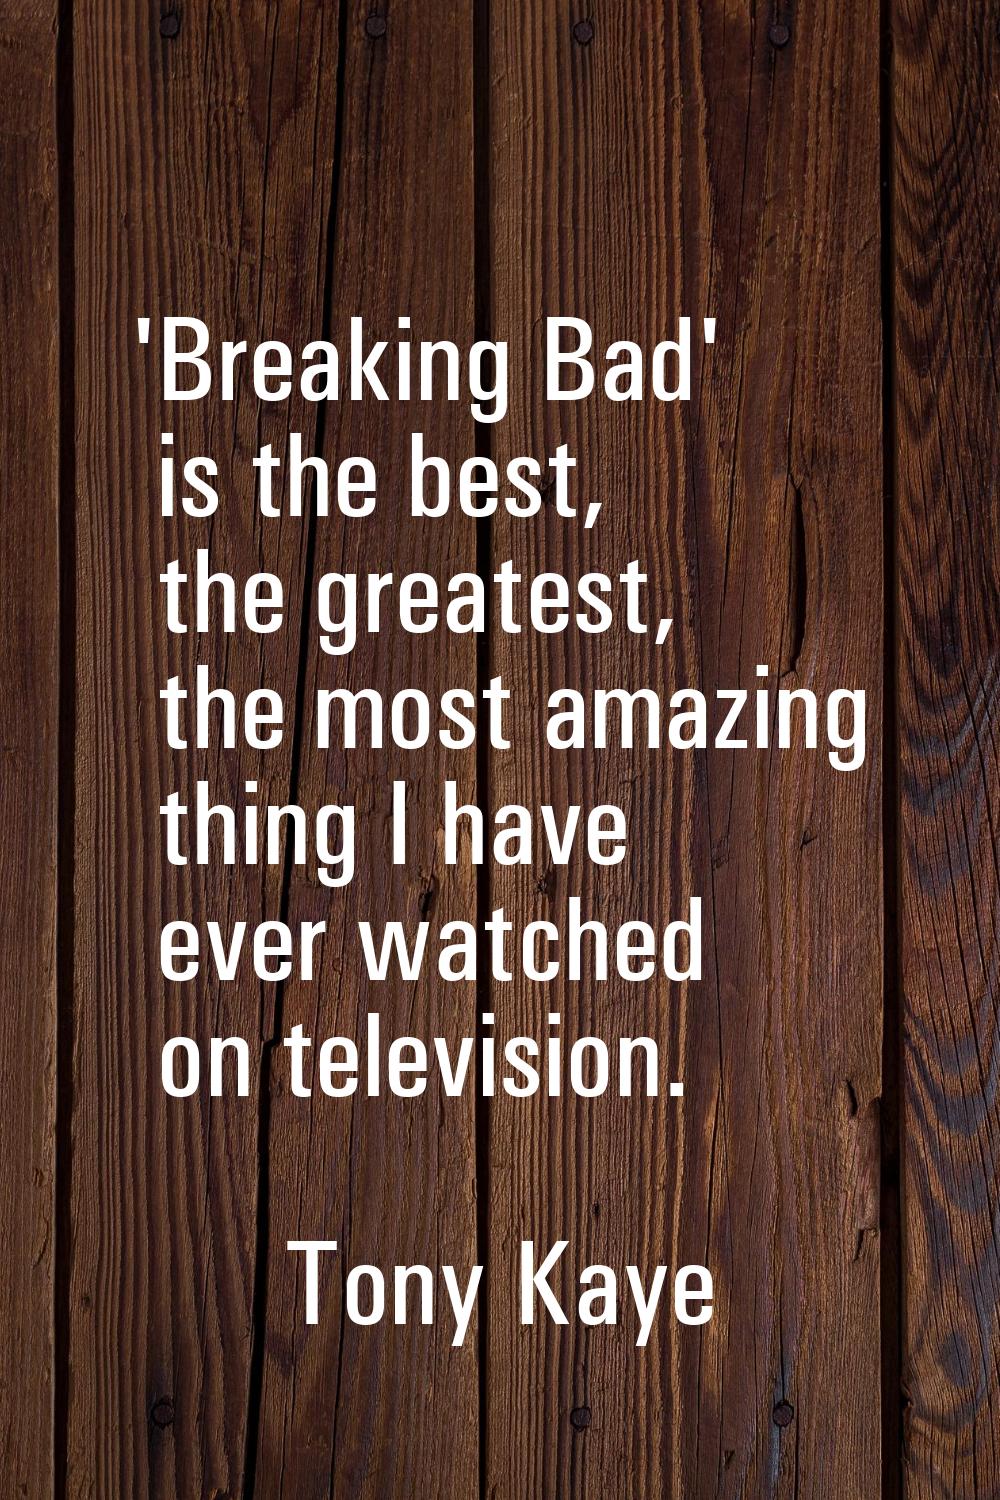 'Breaking Bad' is the best, the greatest, the most amazing thing I have ever watched on television.